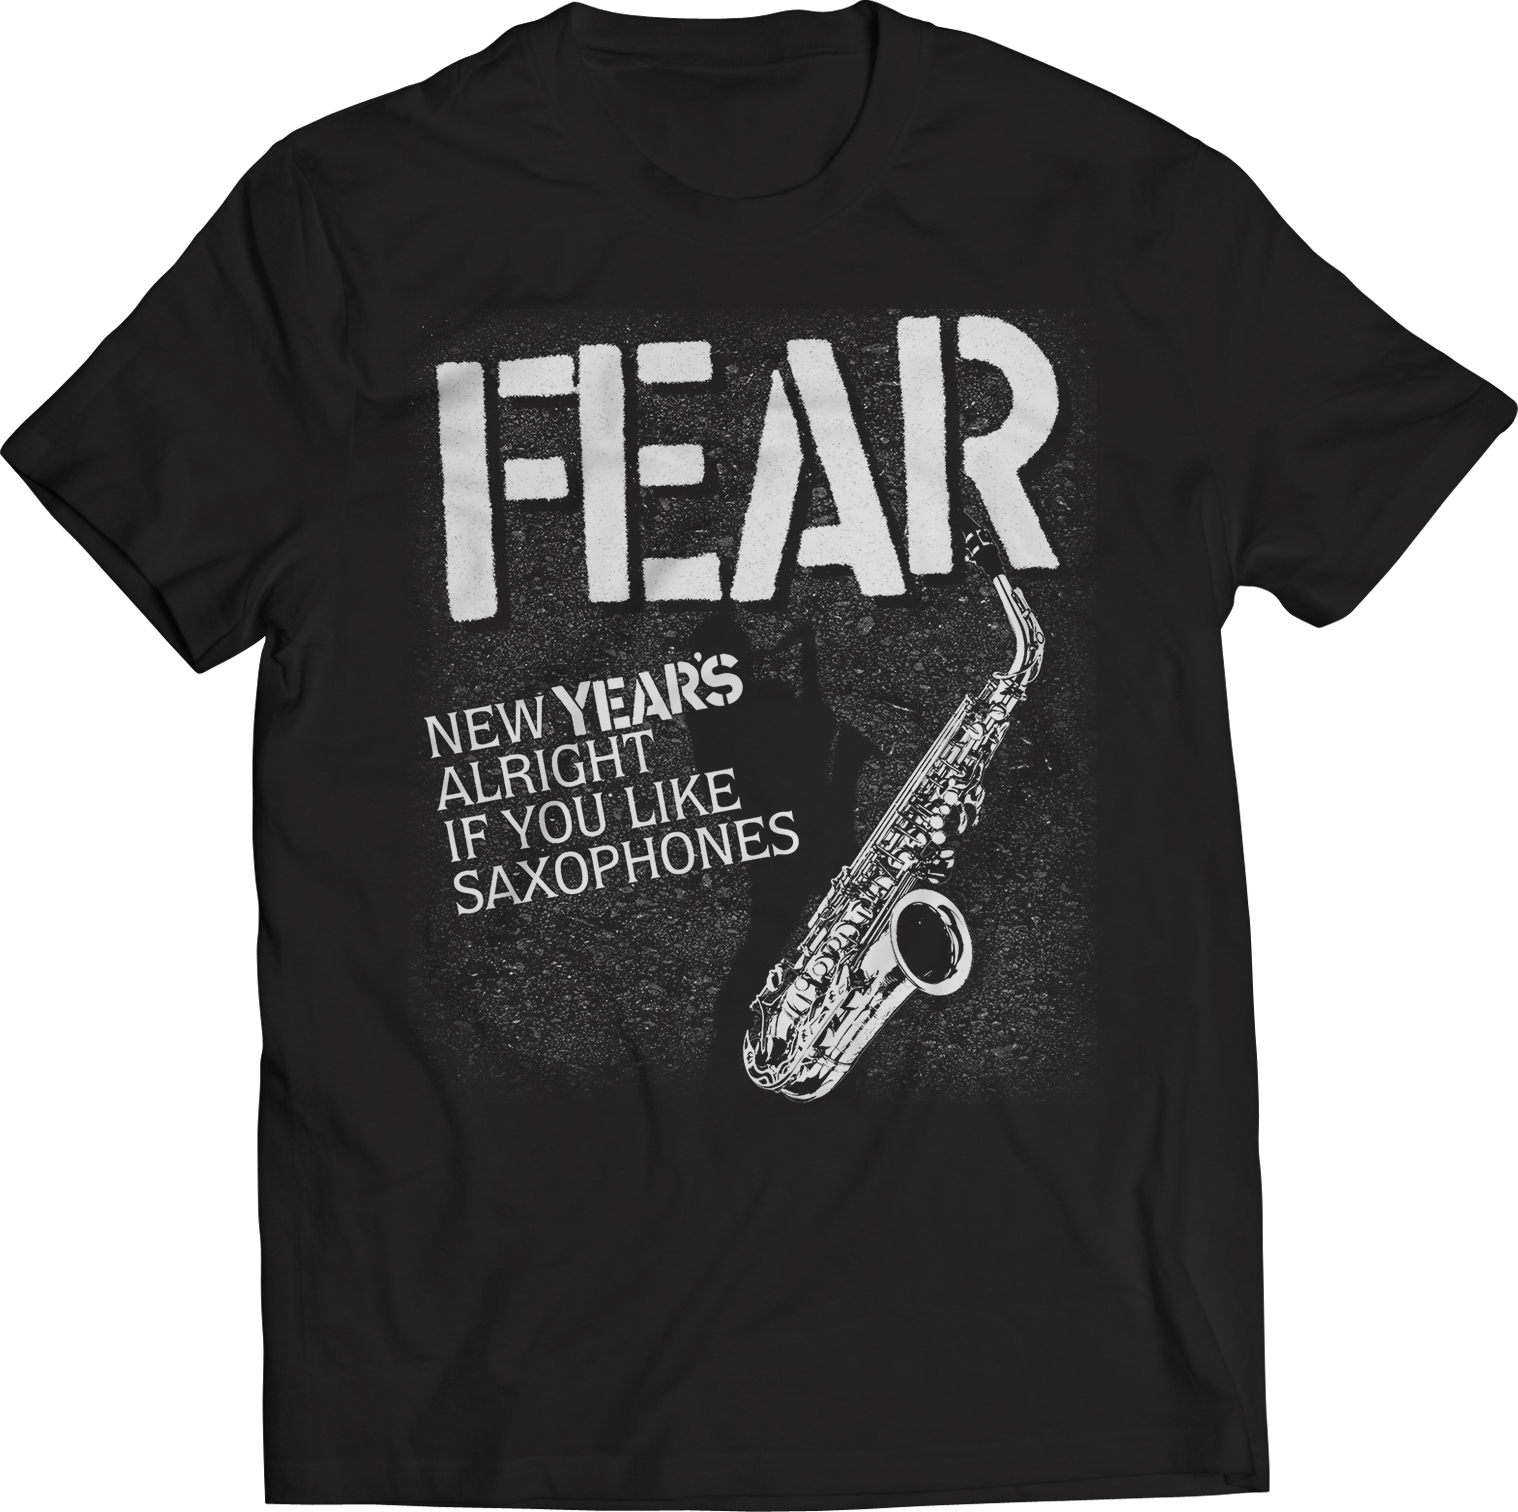 FEAR "NEW YEAR'S ALRIGHT IF YOU LIKE SAXOPHONES" T-SHIRT